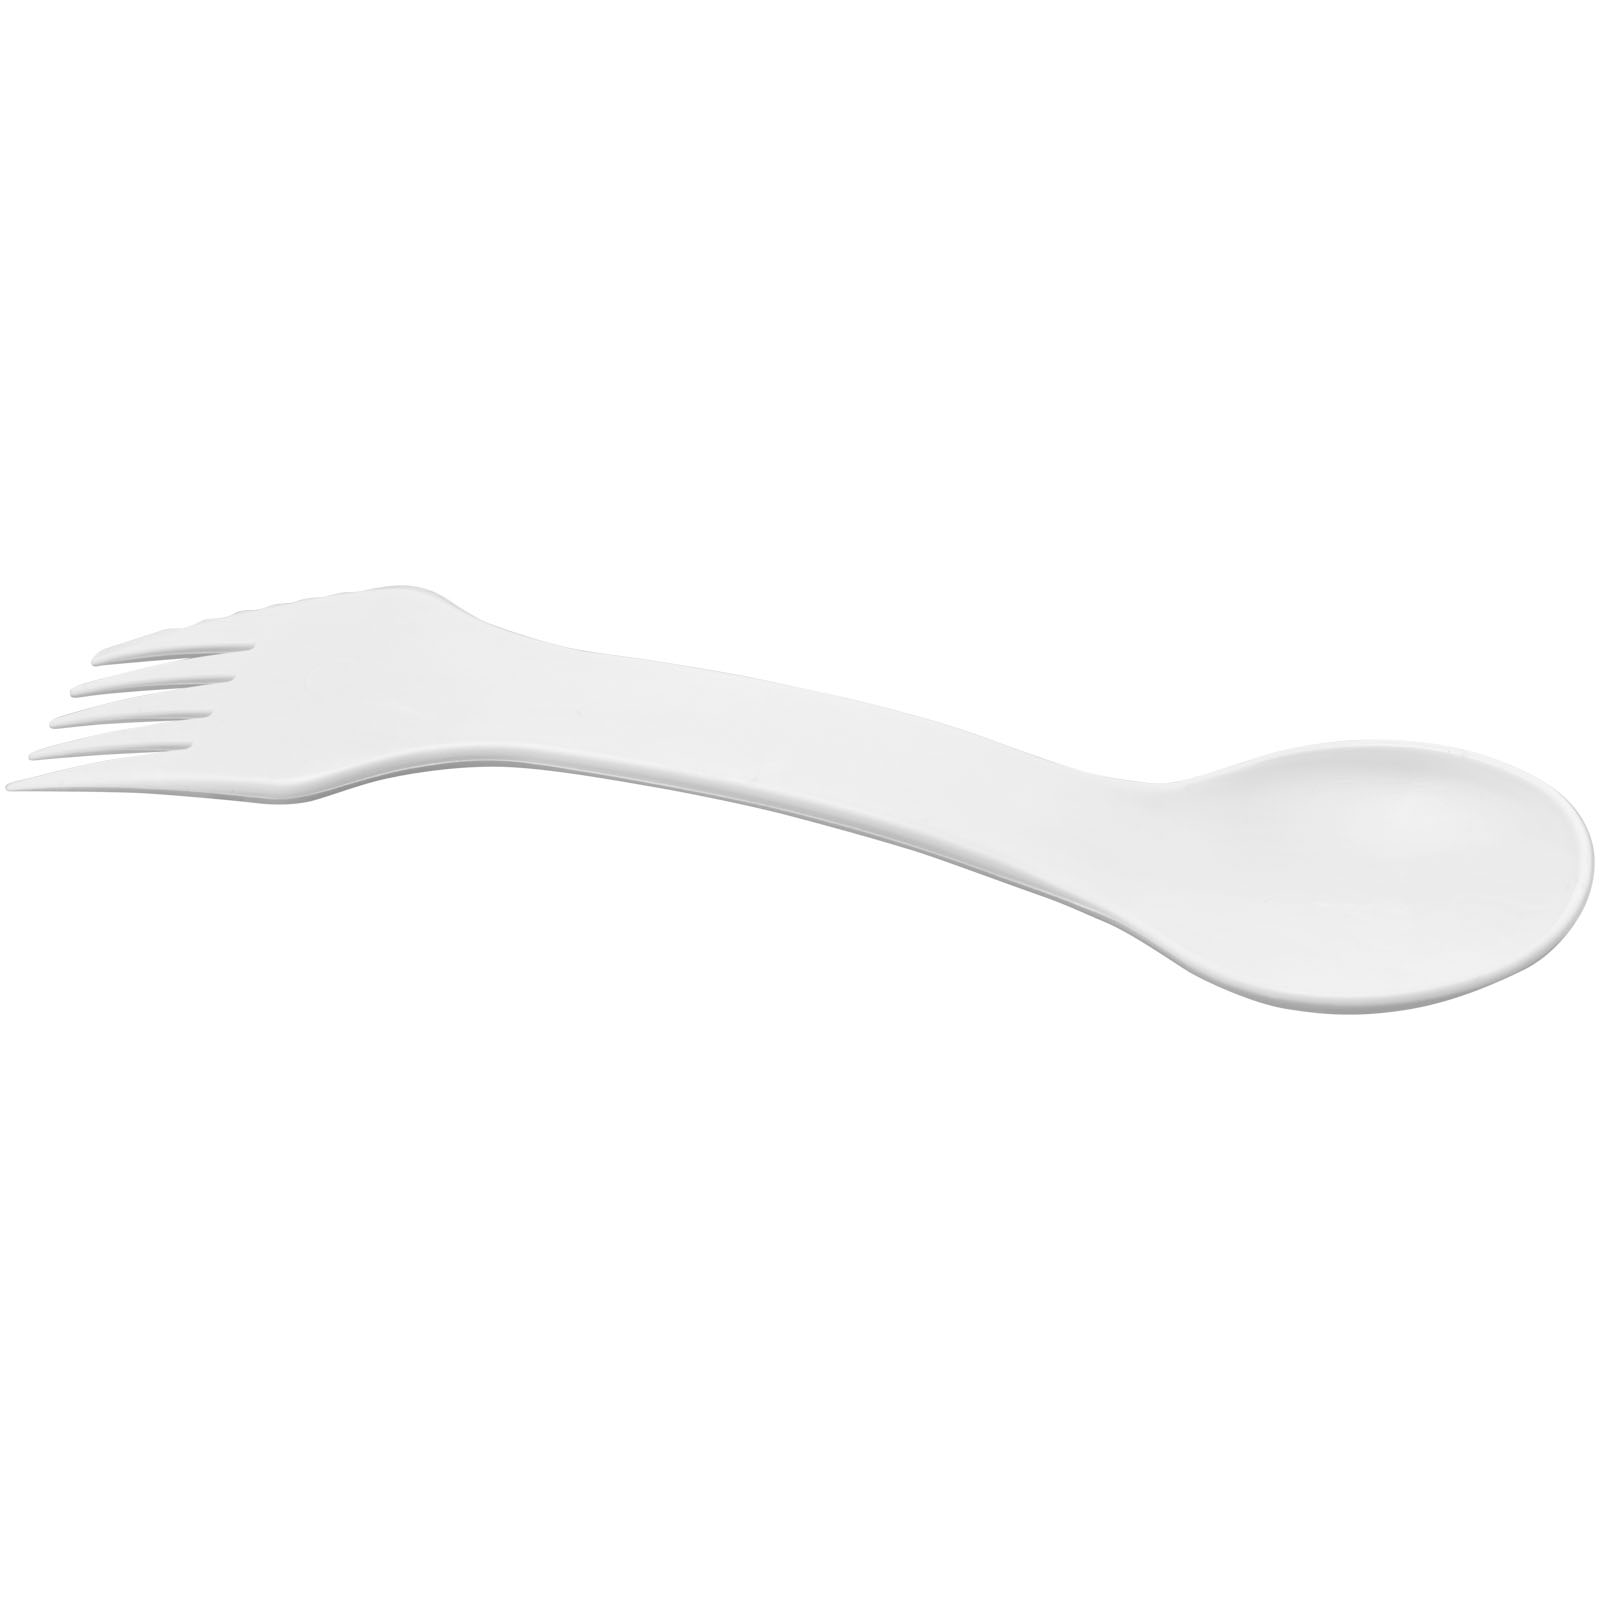 Plastic multifunctional fork 3in1 GIMPY with Biomaster technology - white